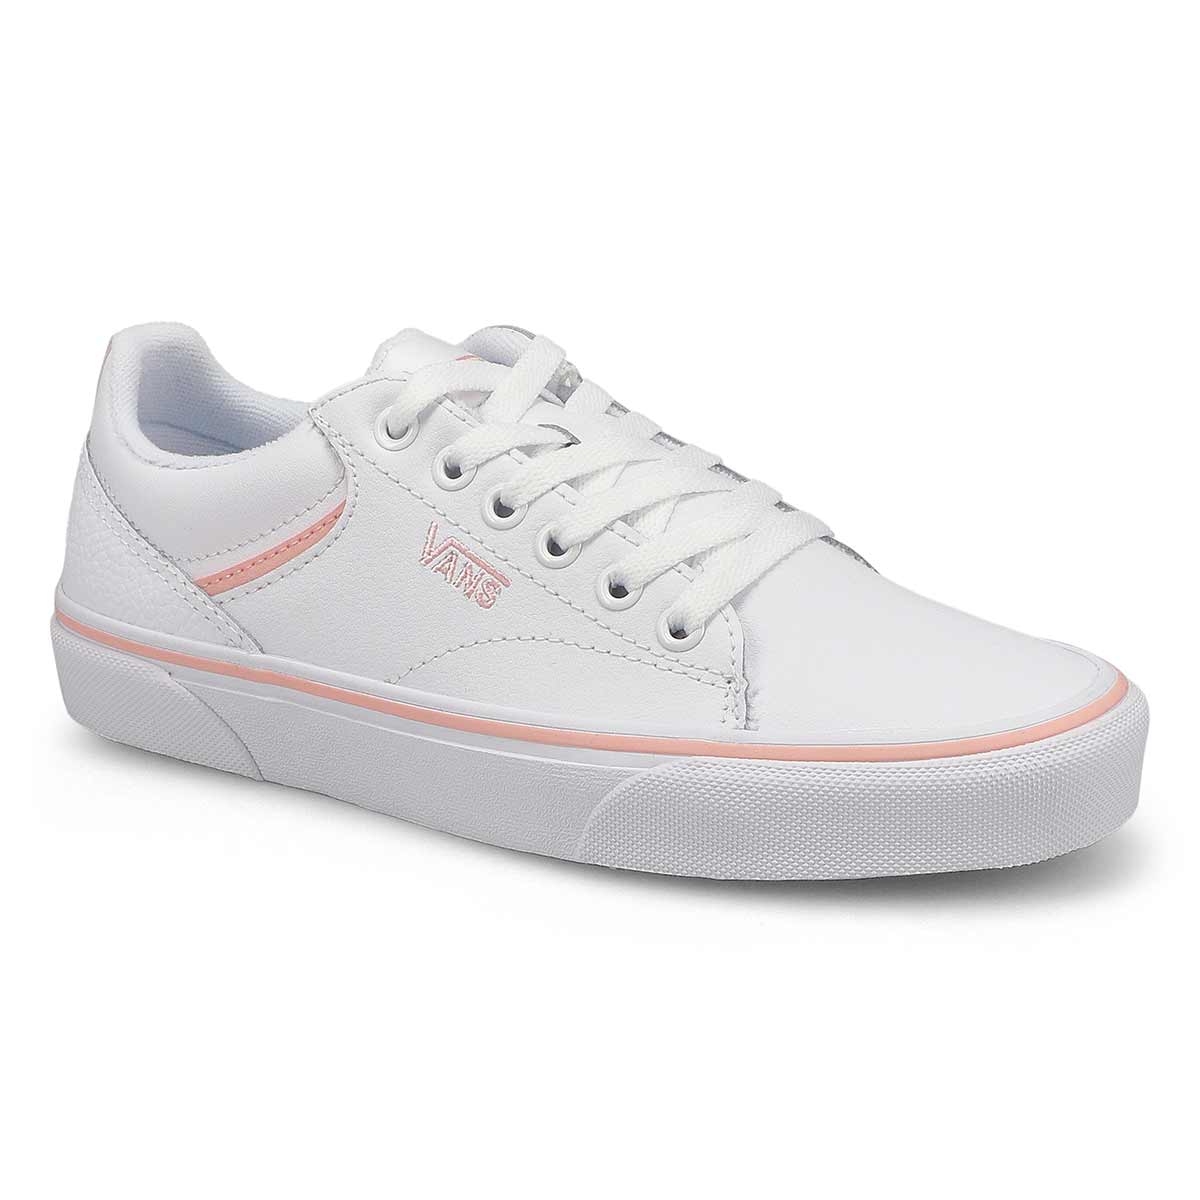 Womens Seldan Leather Lace Up Sneaker - Pink/White